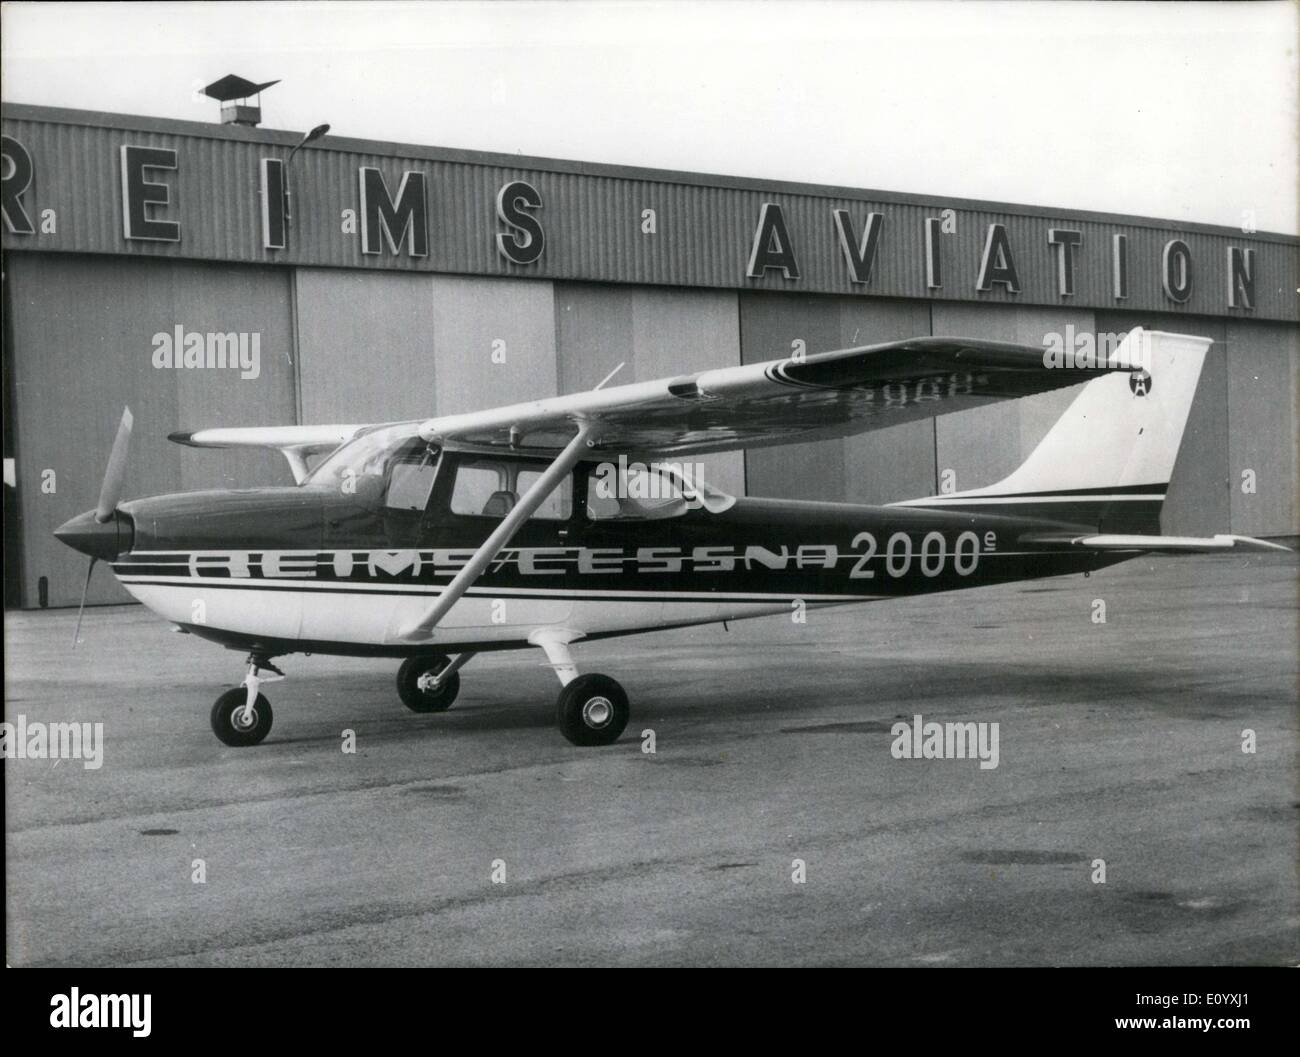 Sep. 30, 1971 - The Reims/Cessna 2000th Production Stock Photo